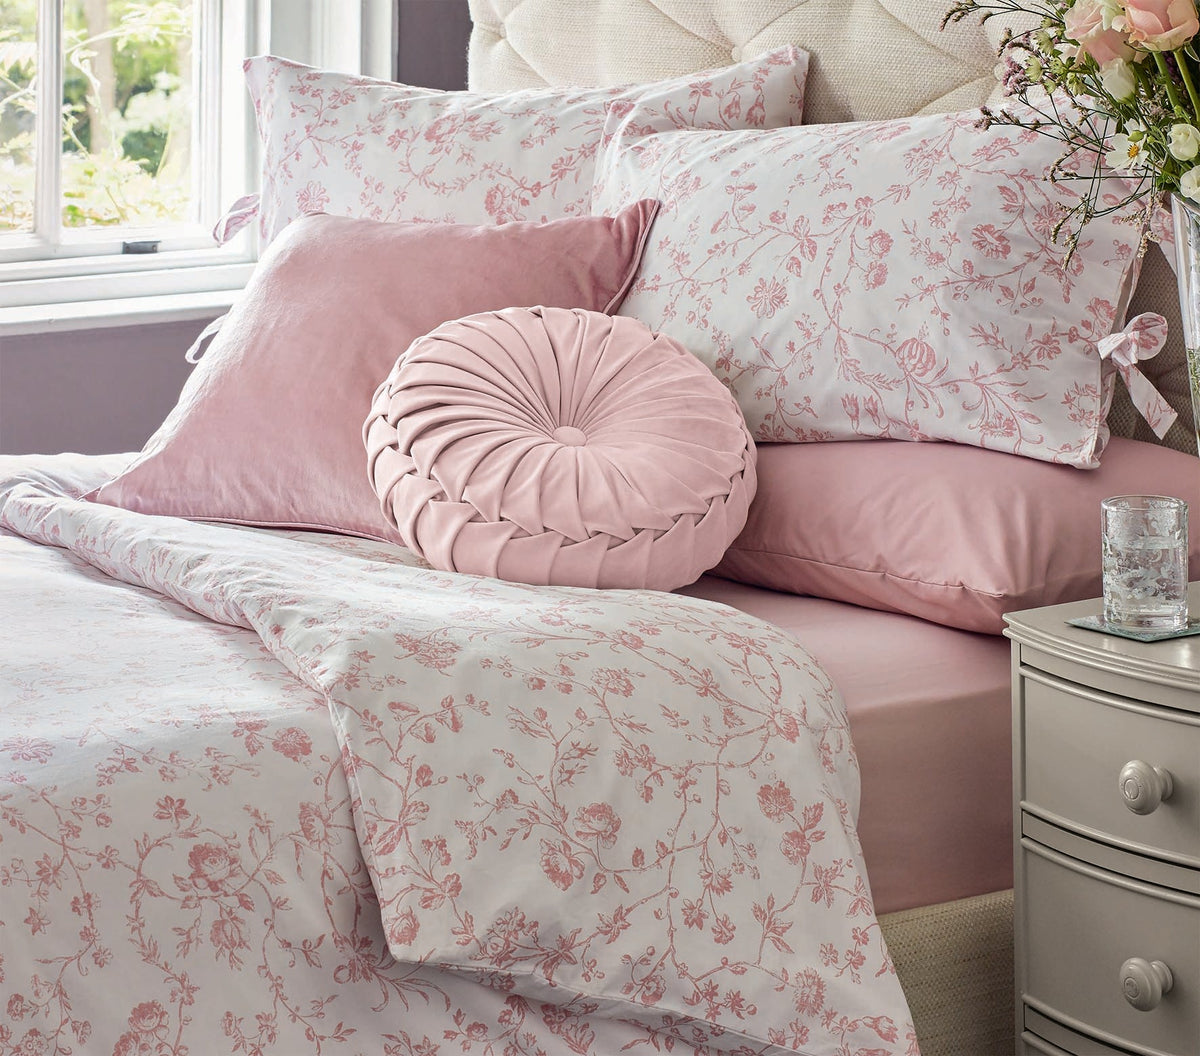 The Laura Ashley aria duvet set in a pretty pink floral design also showing the nigella Rosalind pink cushions